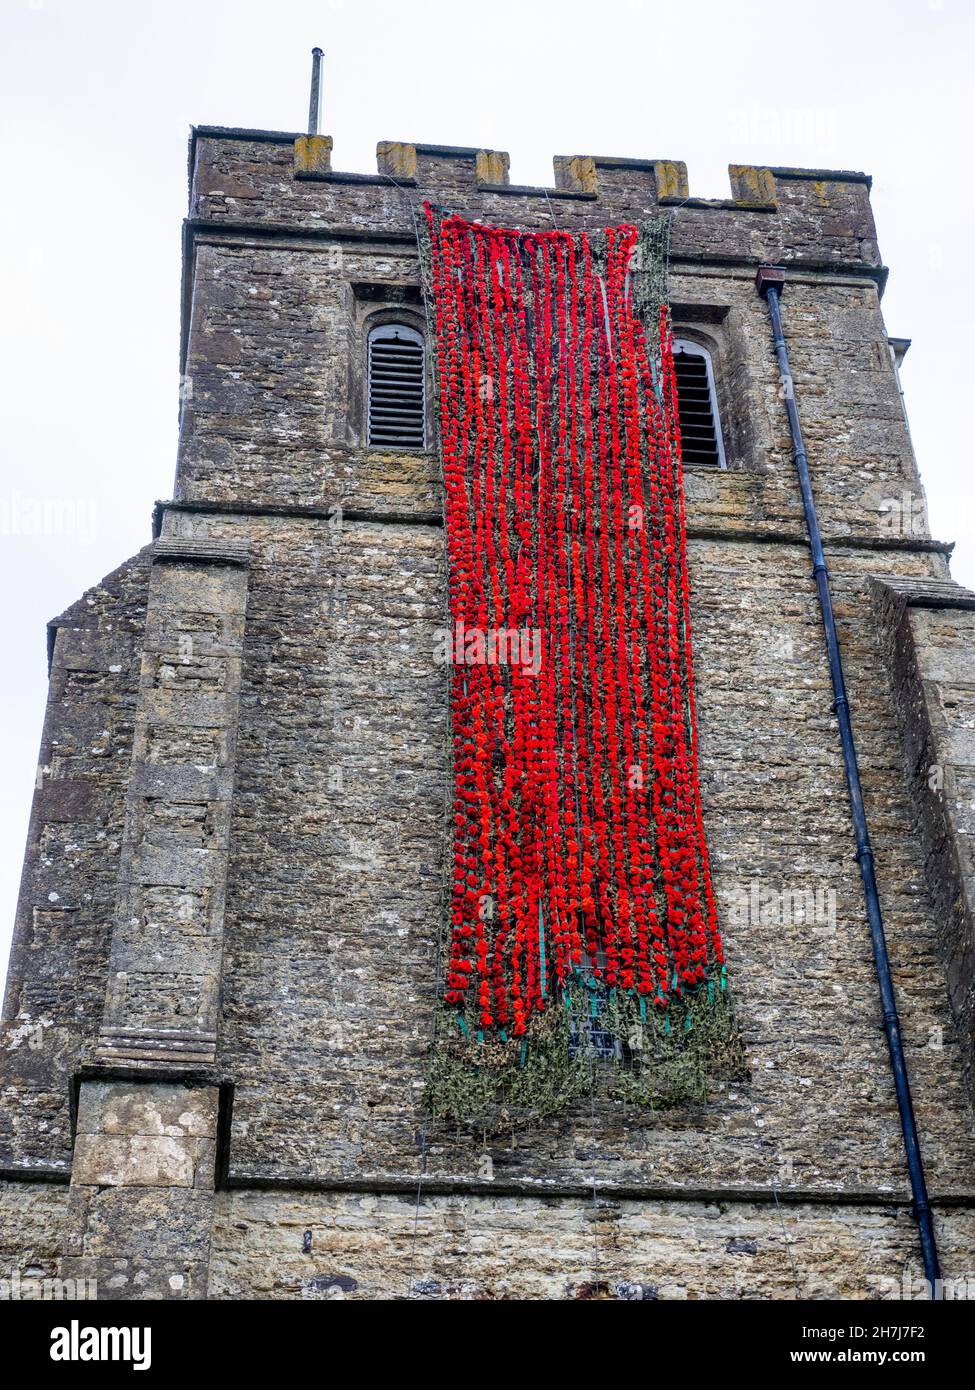 Knitted poppies adorning Biddenden church in Kent as part of the Remembrance Sunday and Armistice Day commemorations in the UK Stock Photo